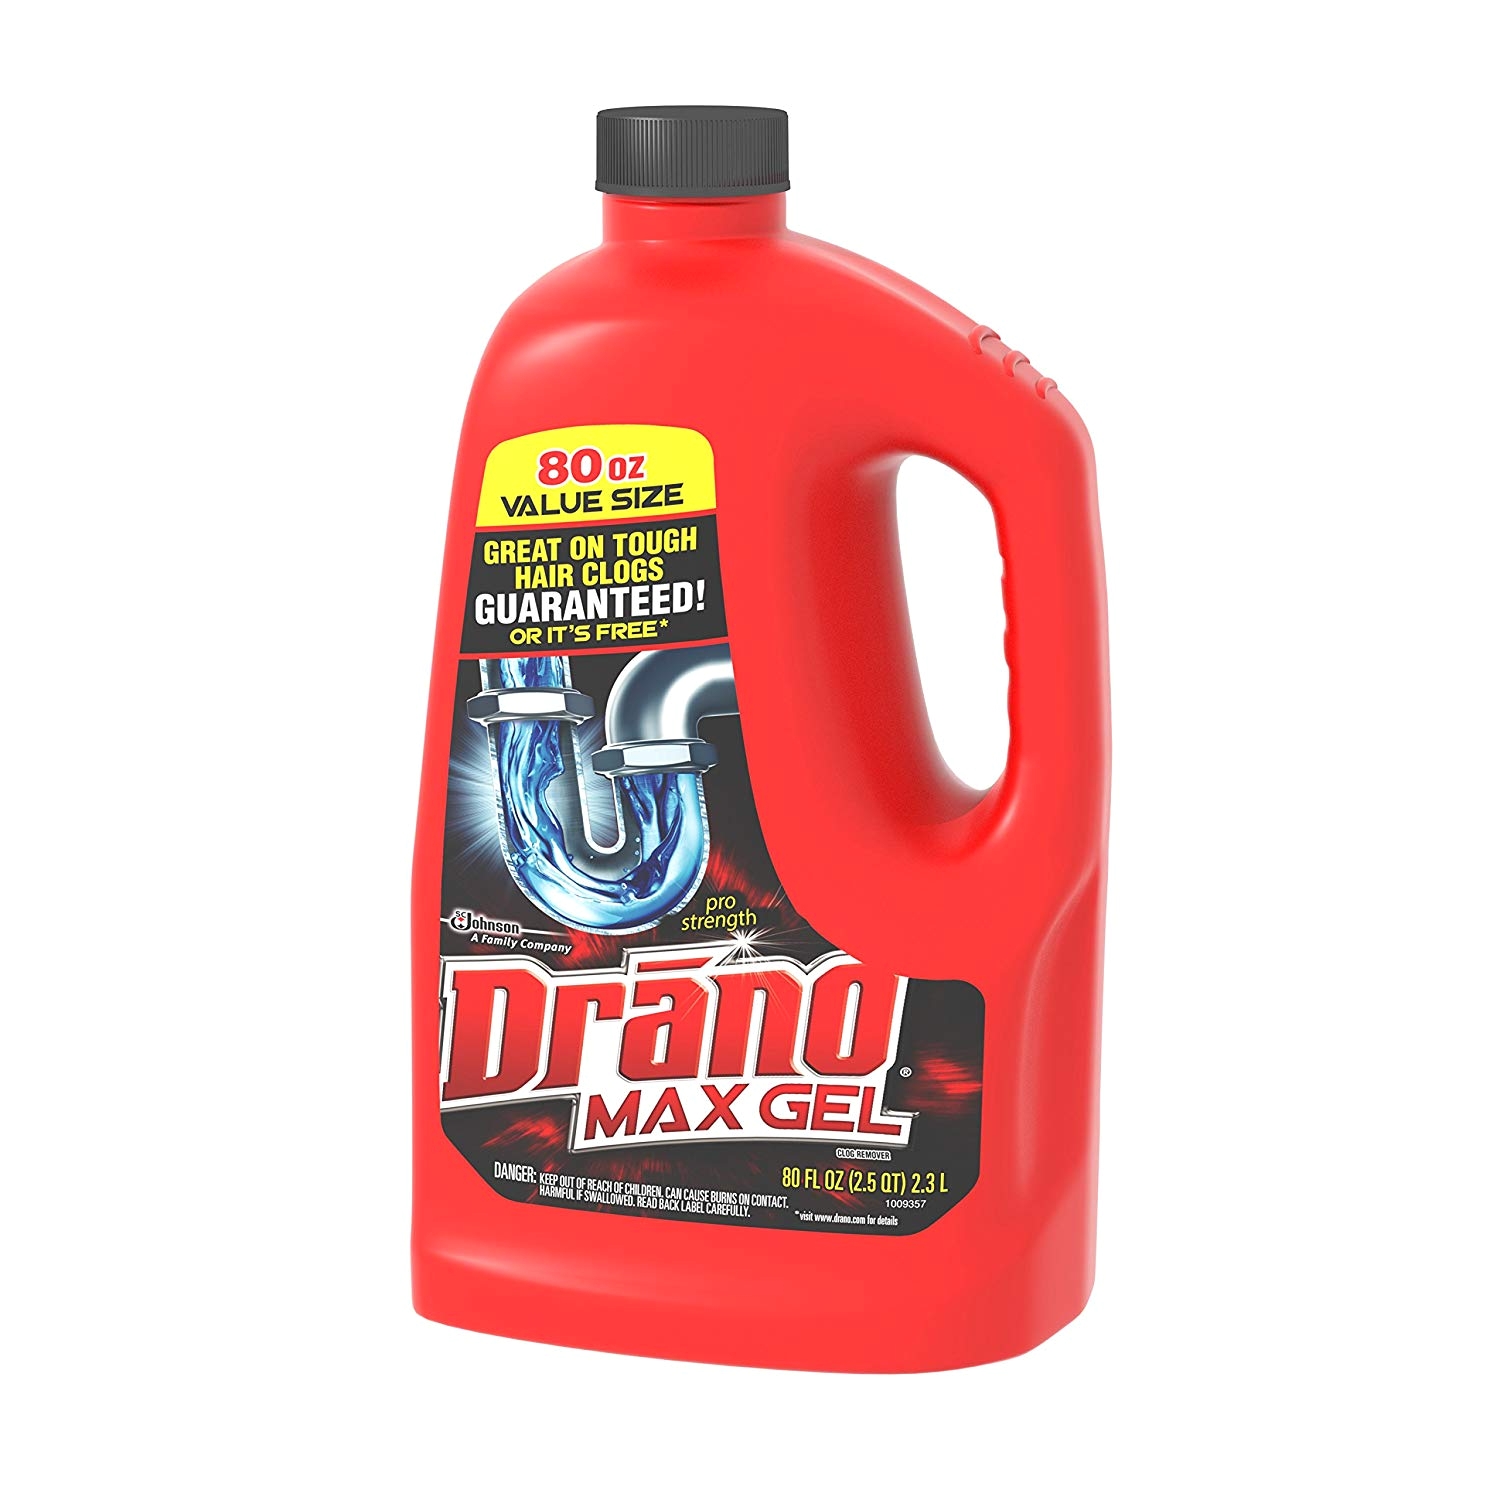 adorable liquid plumber kitchen sink on amazon drano max gel clog remover 80 ounce health personal